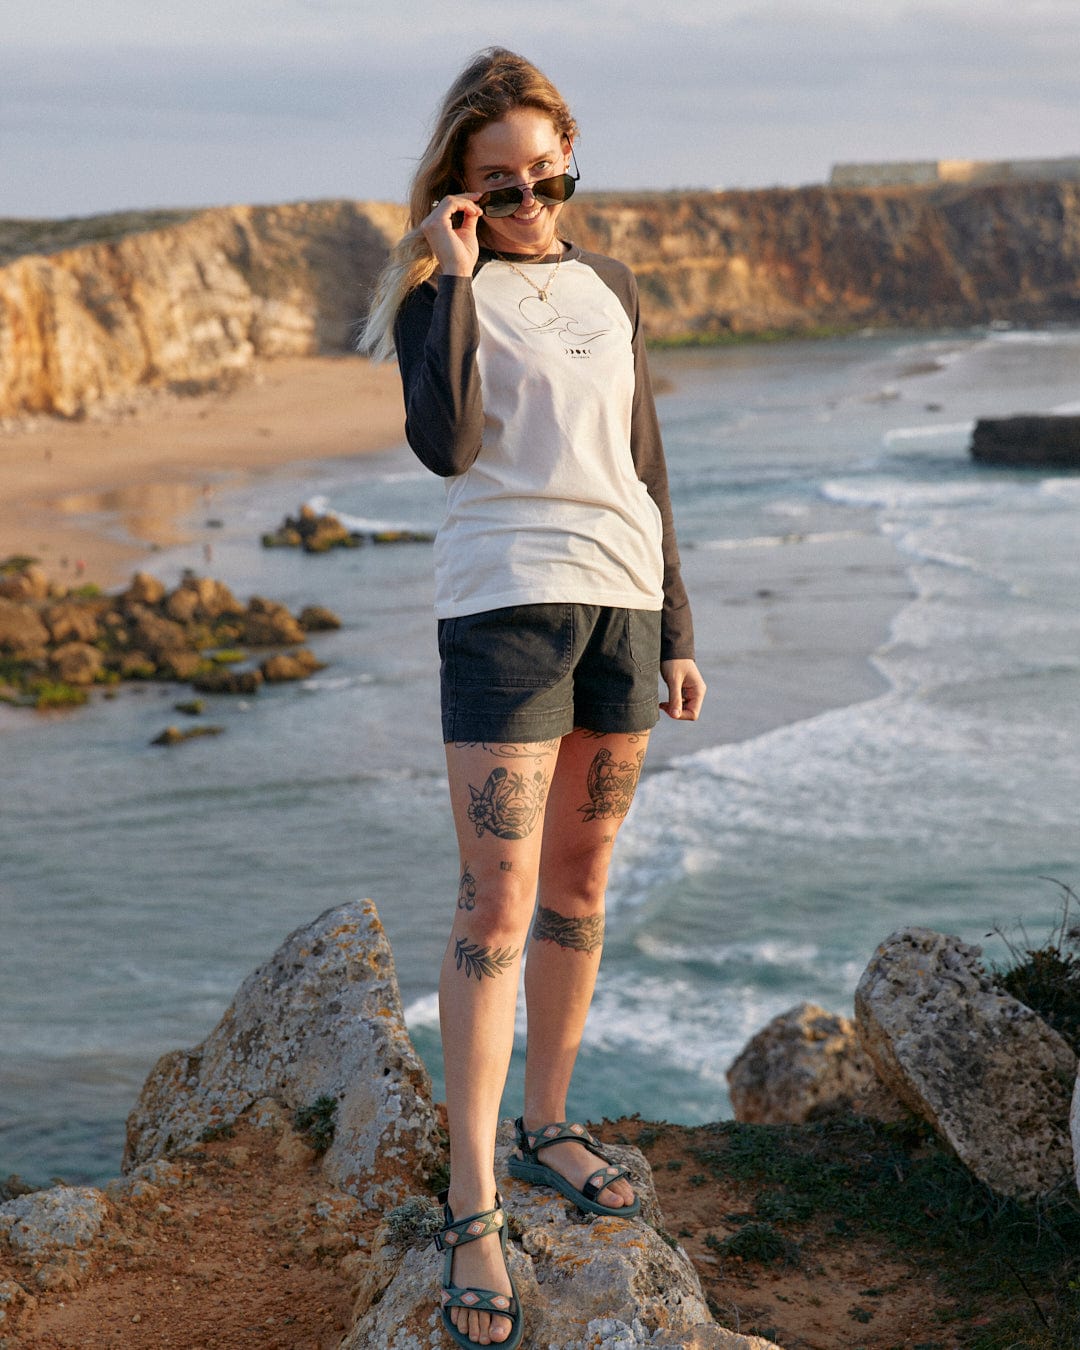 A woman with tattoos standing on a rock by the ocean wearing Saltrock's High Tides - Womens Raglan Long Sleeve T-Shirt in White.